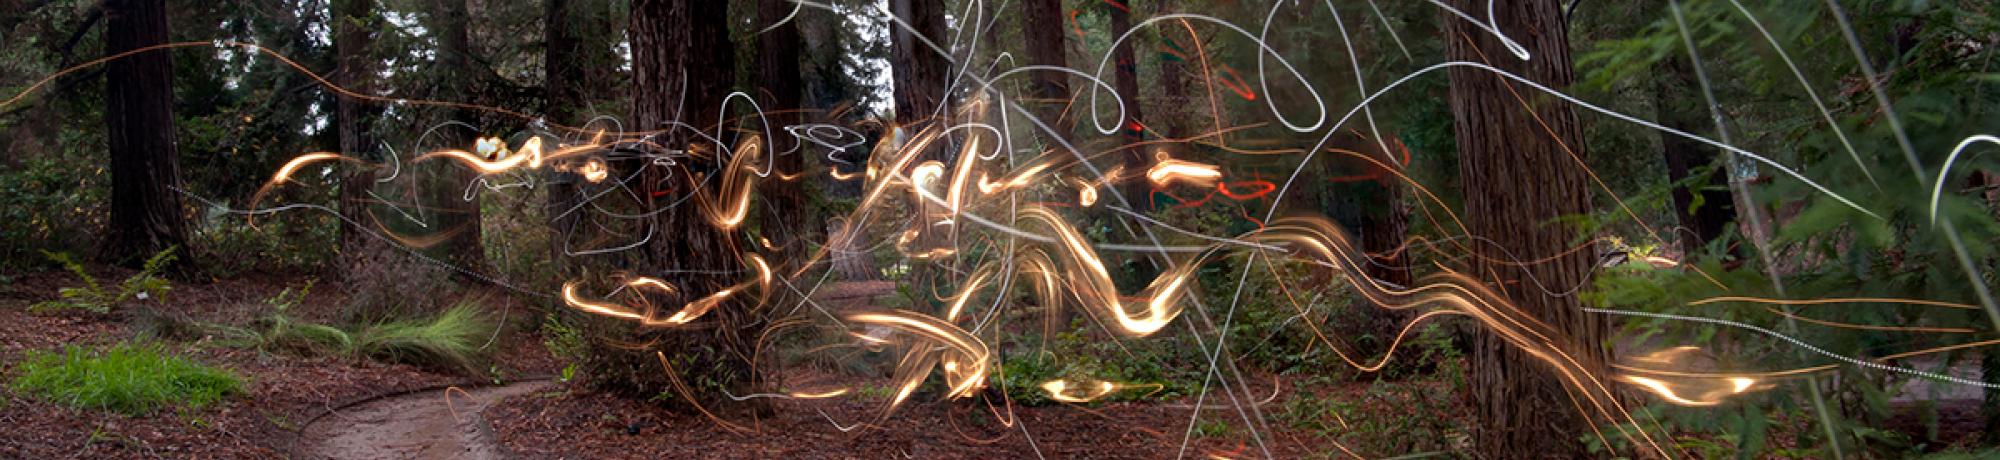 Photo: squiggles of light along path in the UC Davis arboretum's redwood grove